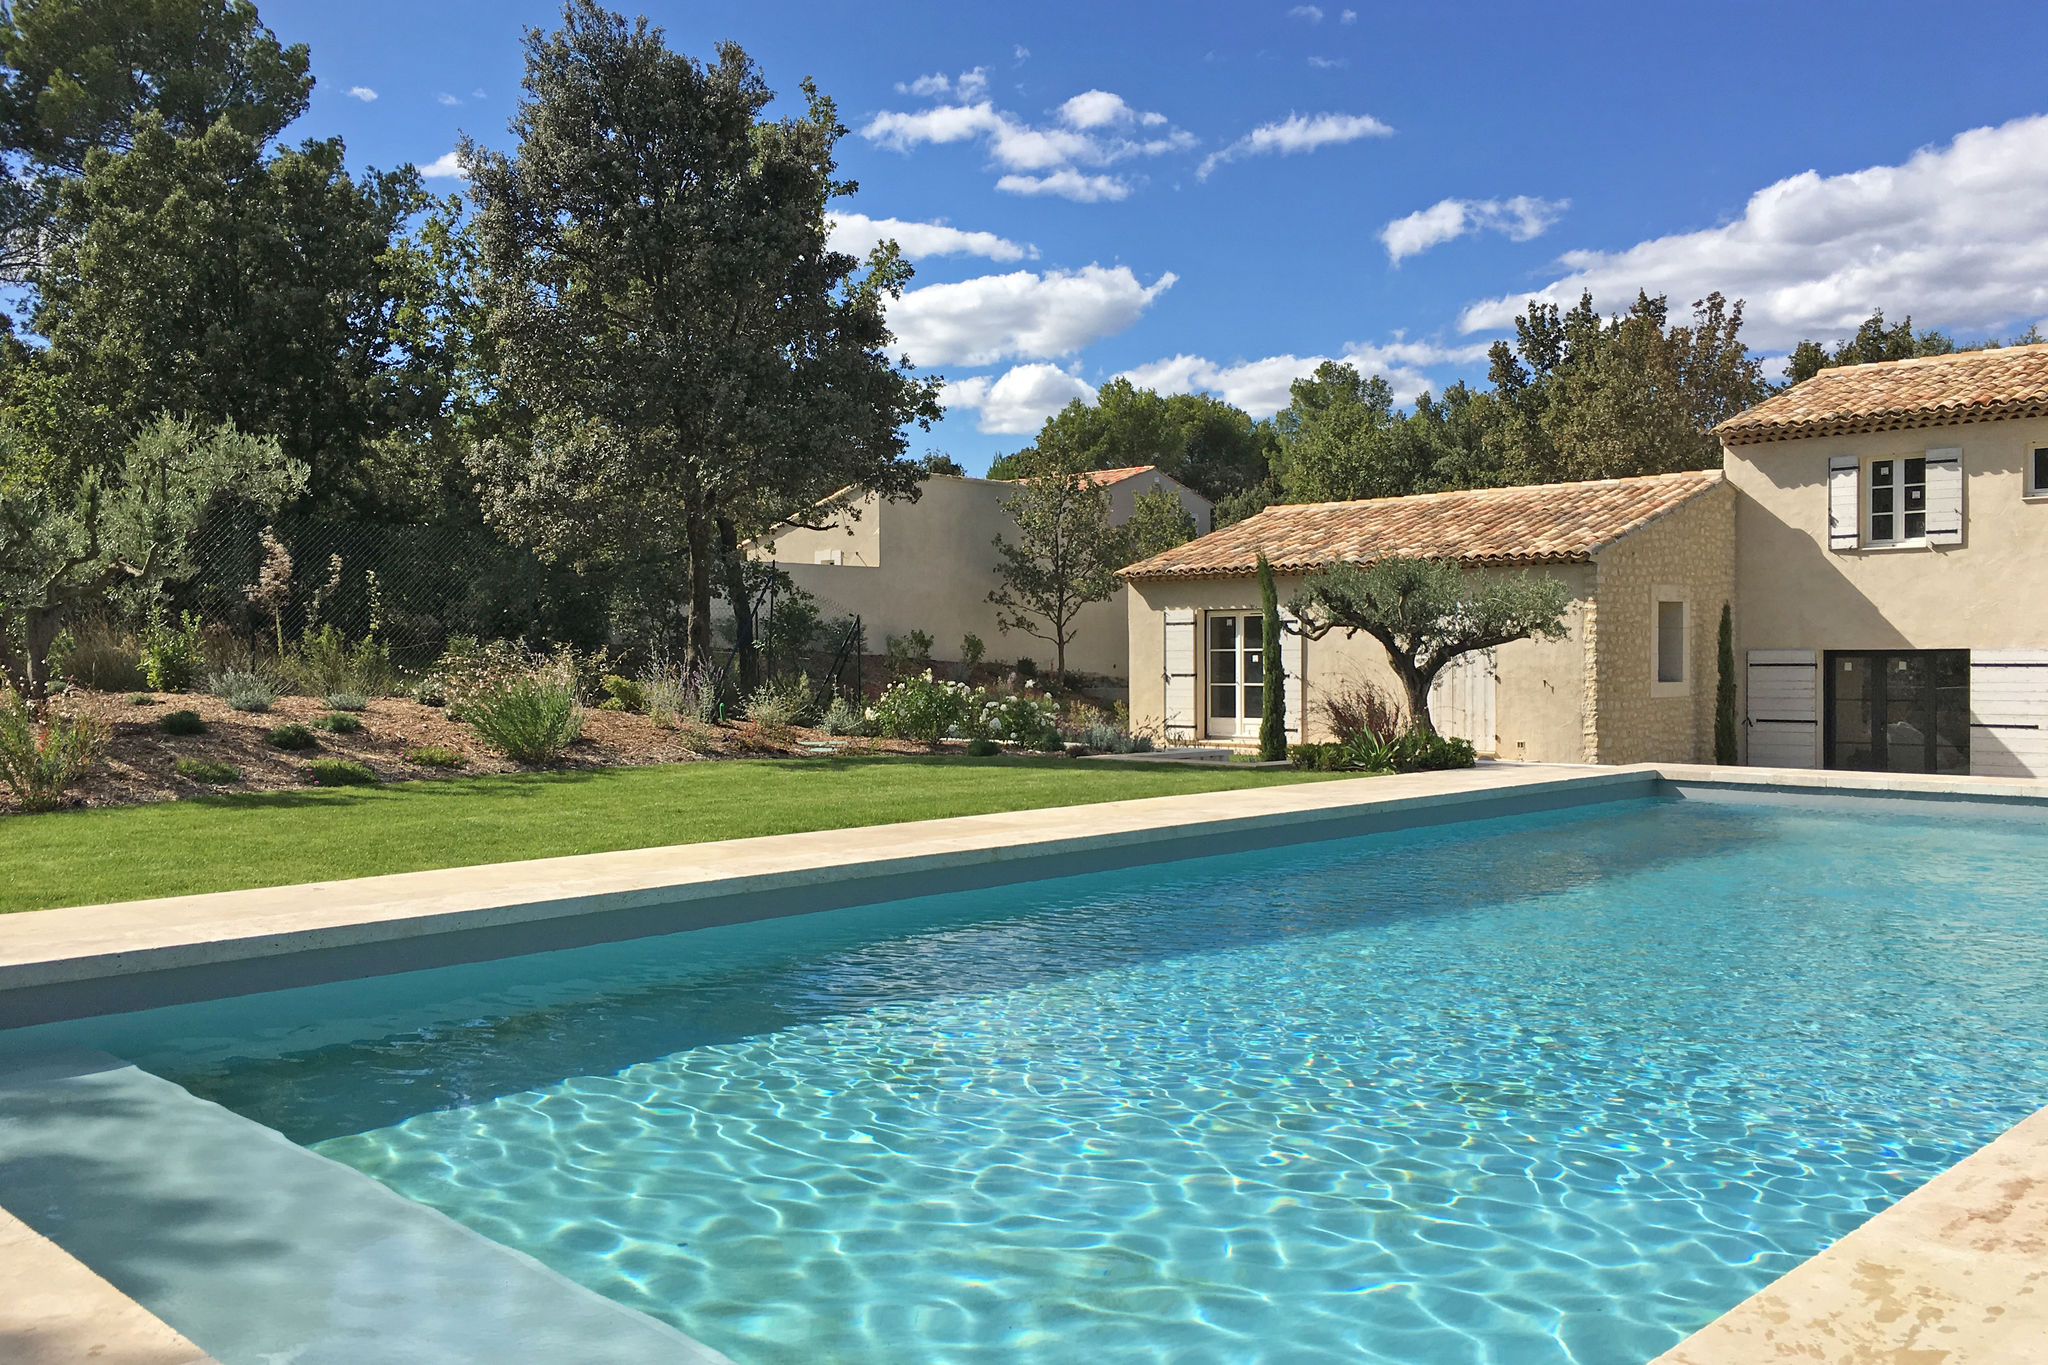 Modern holiday cottage with swimming pool and close to beautiful Saint-Remy-de-Provence.